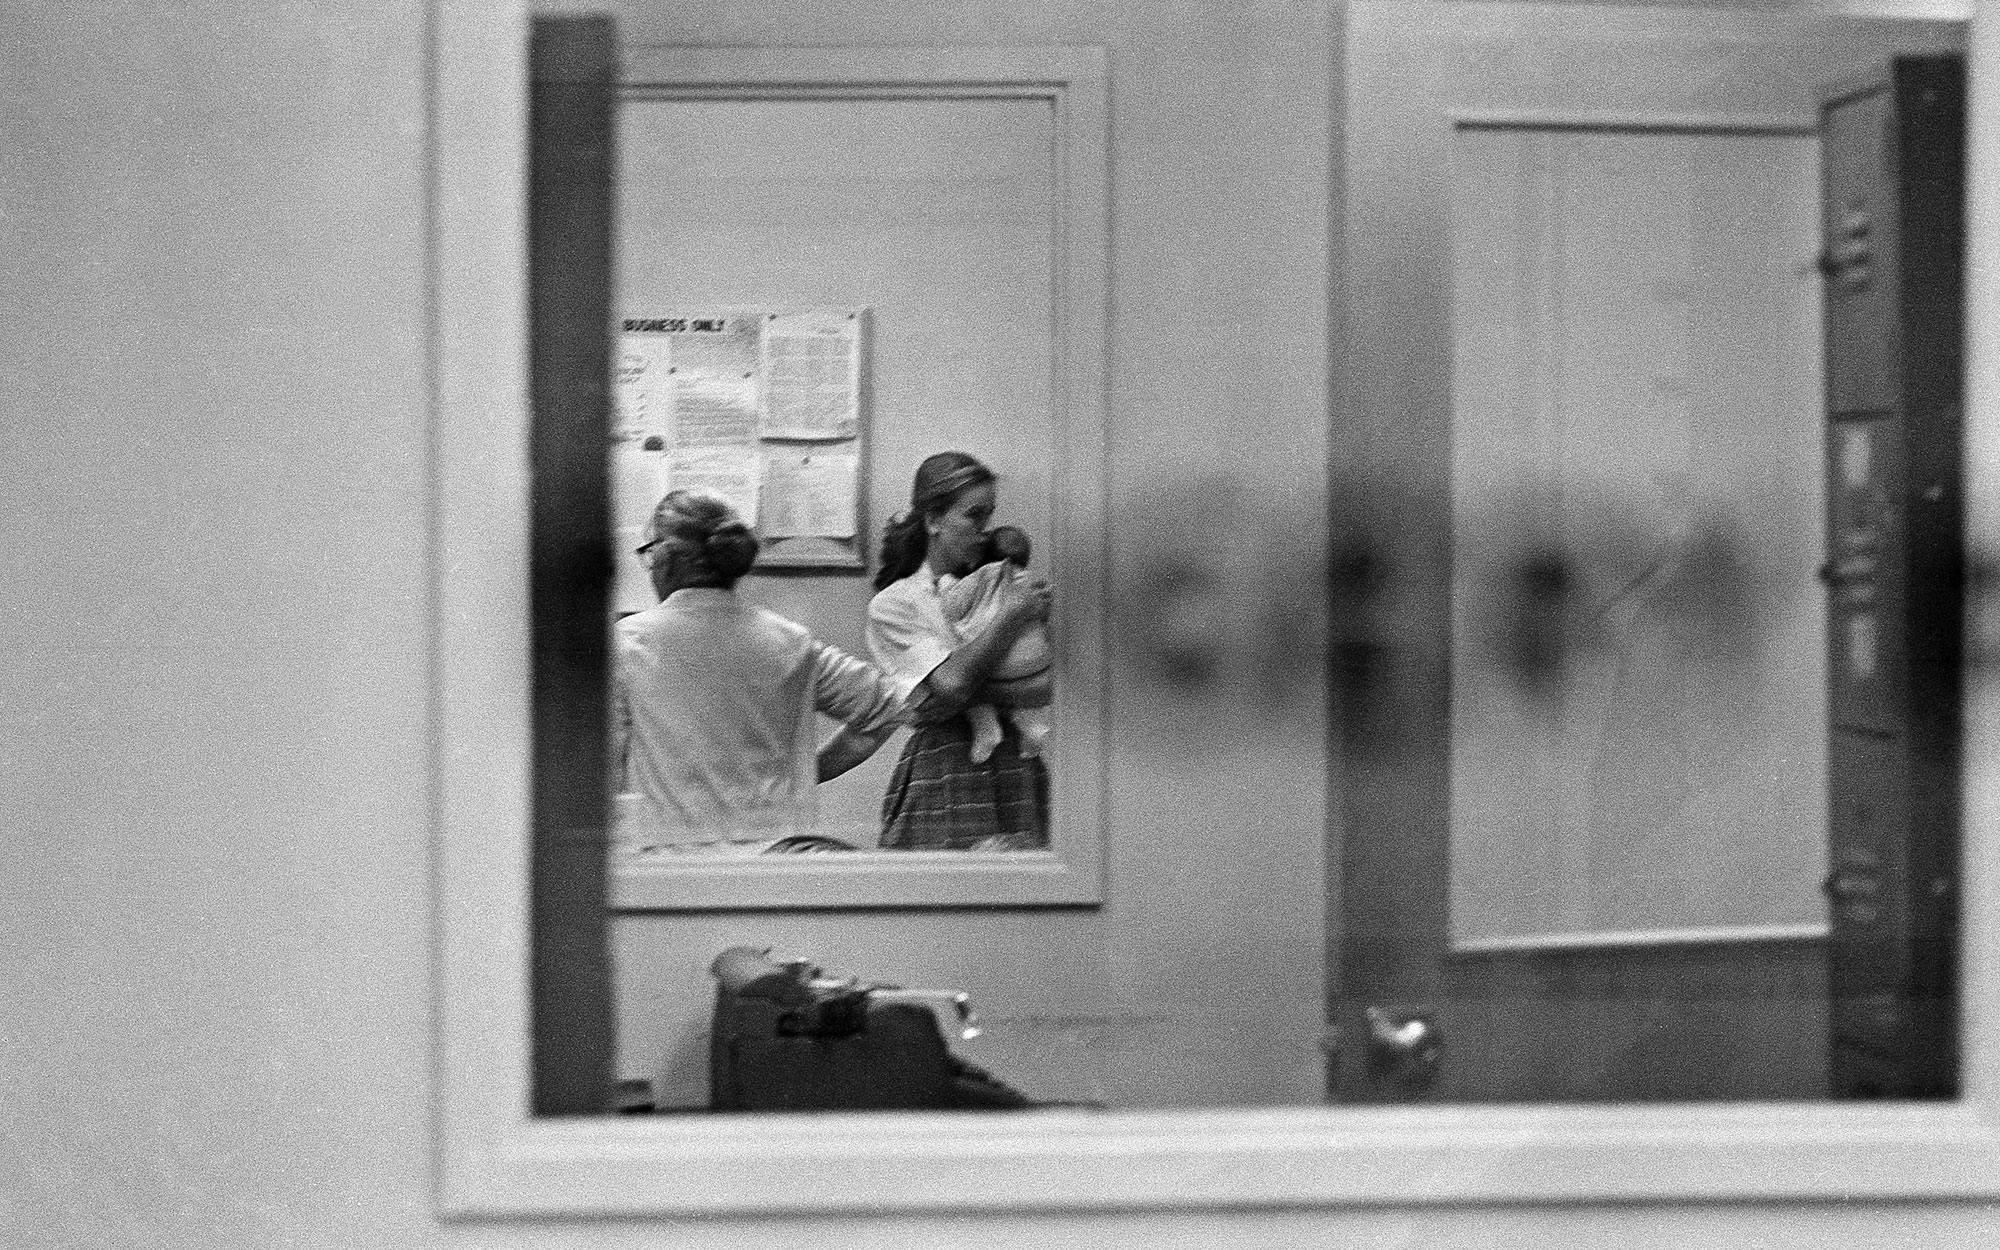 Marina, holding a baby Rachel, and Marguerite Oswald seen through a window in the Dallas police station.